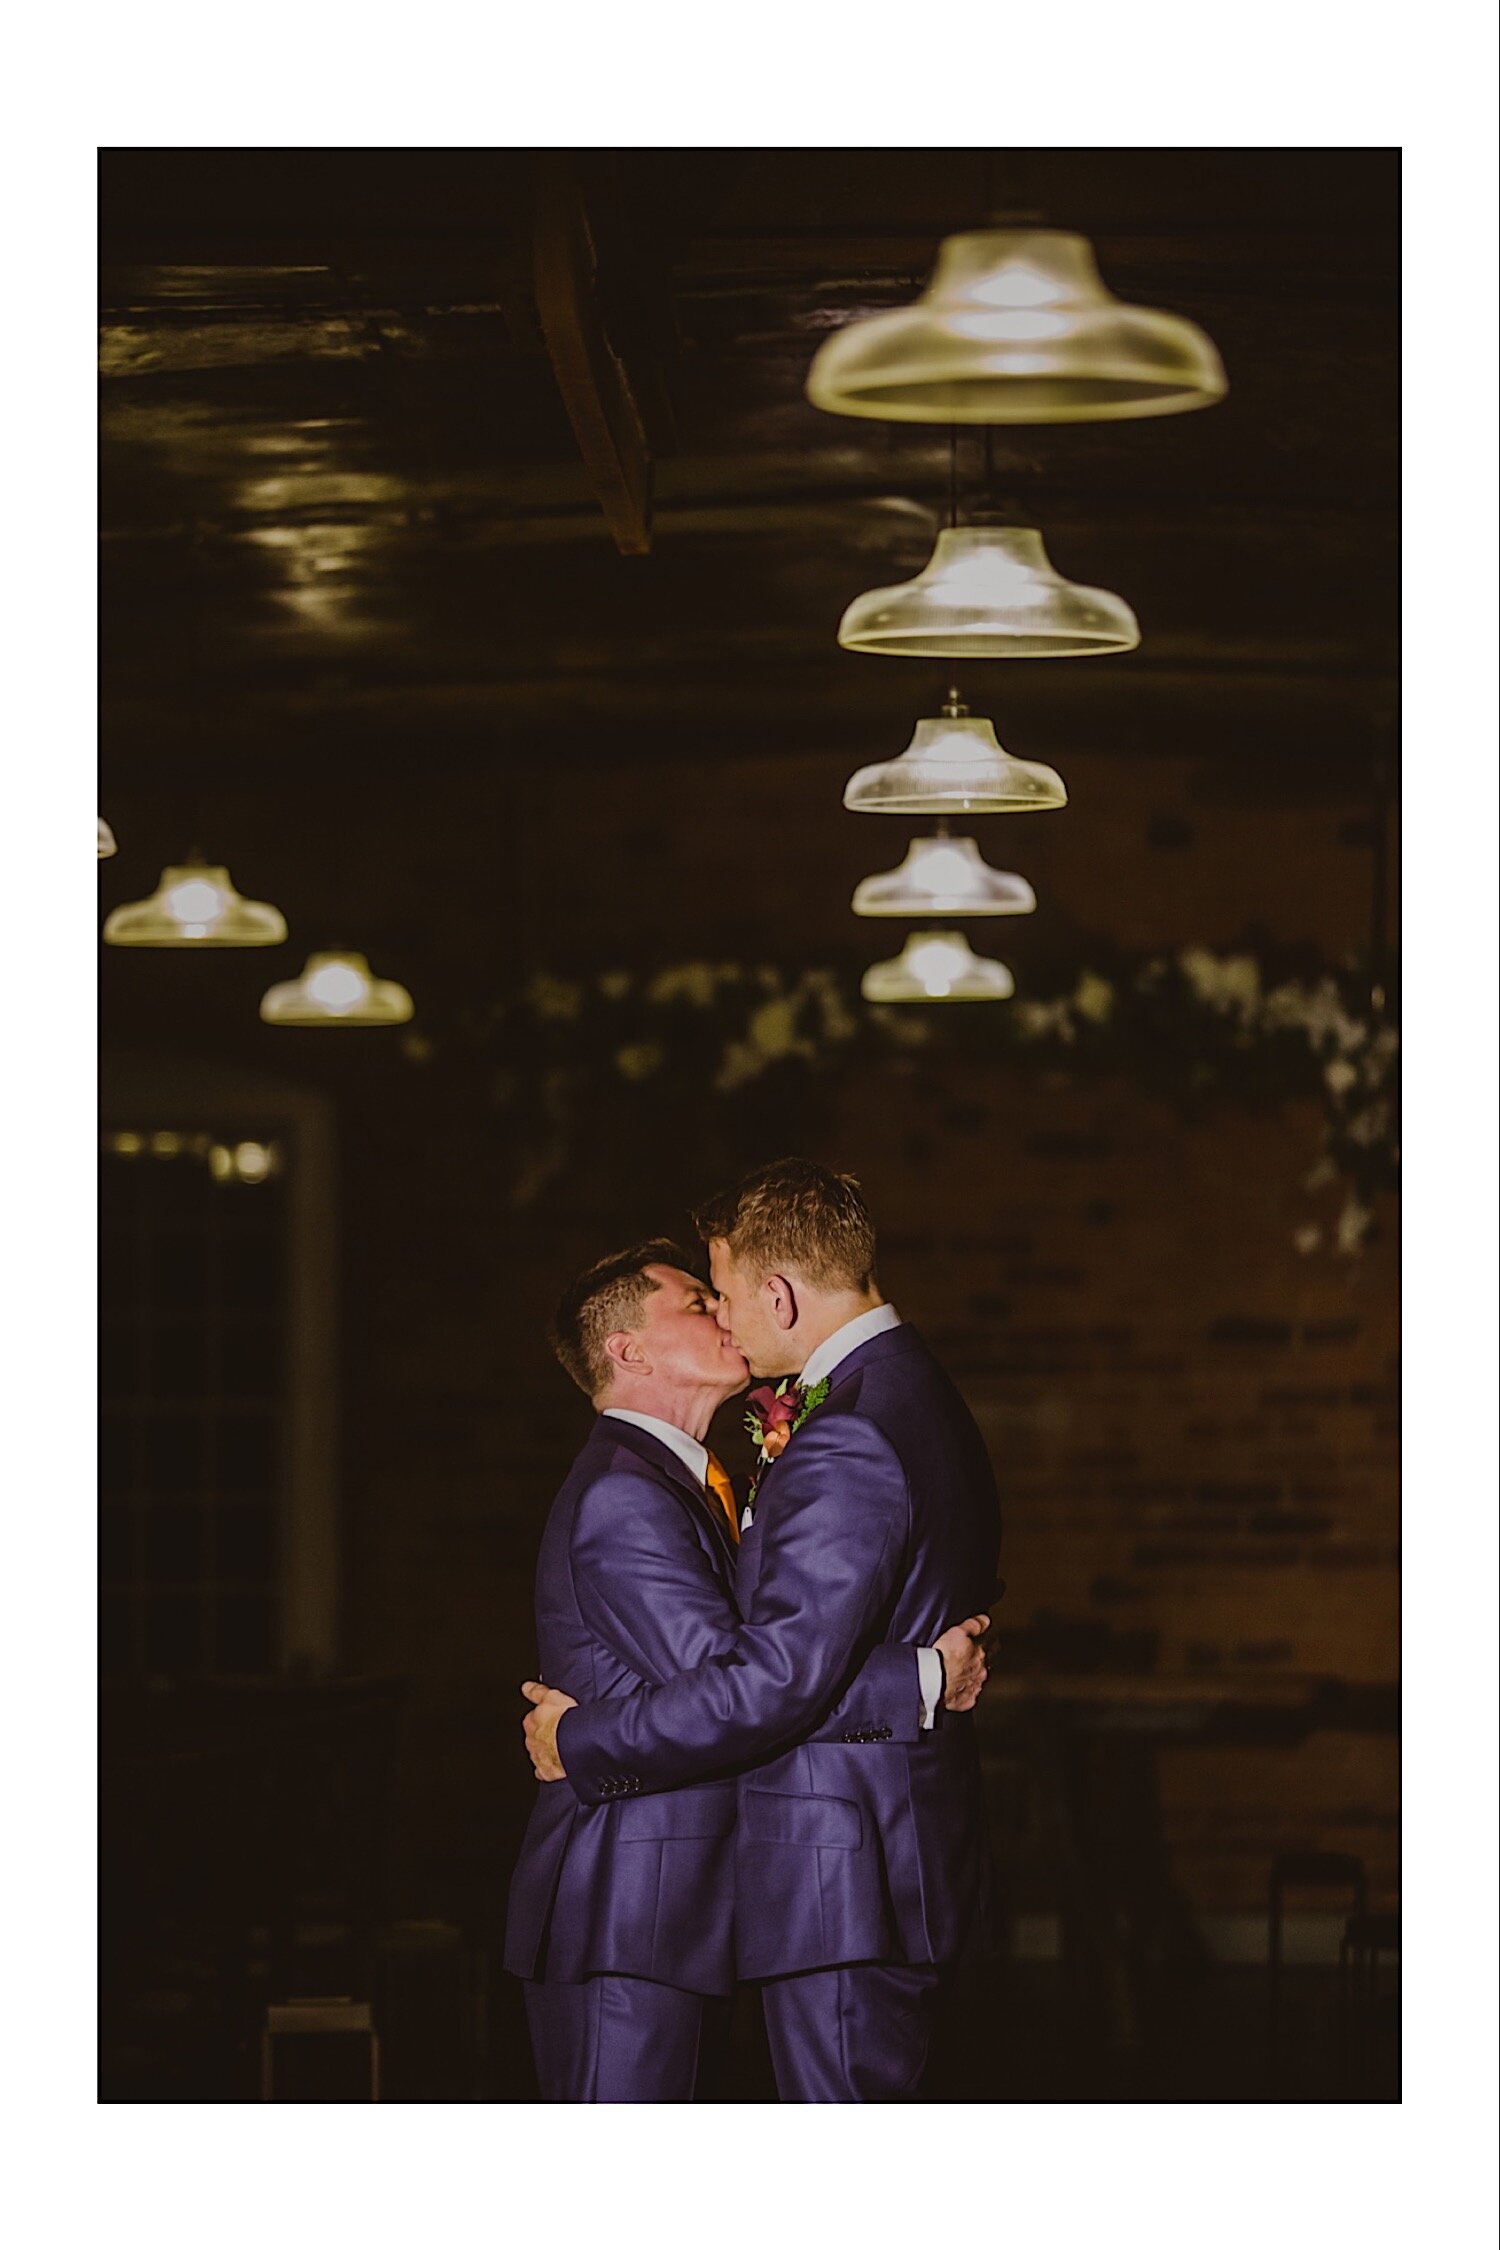 80_TWS-872_photographer_winter_wedding_industrial_venue_gay_photography_grooms_chic_westmill_derby.jpg